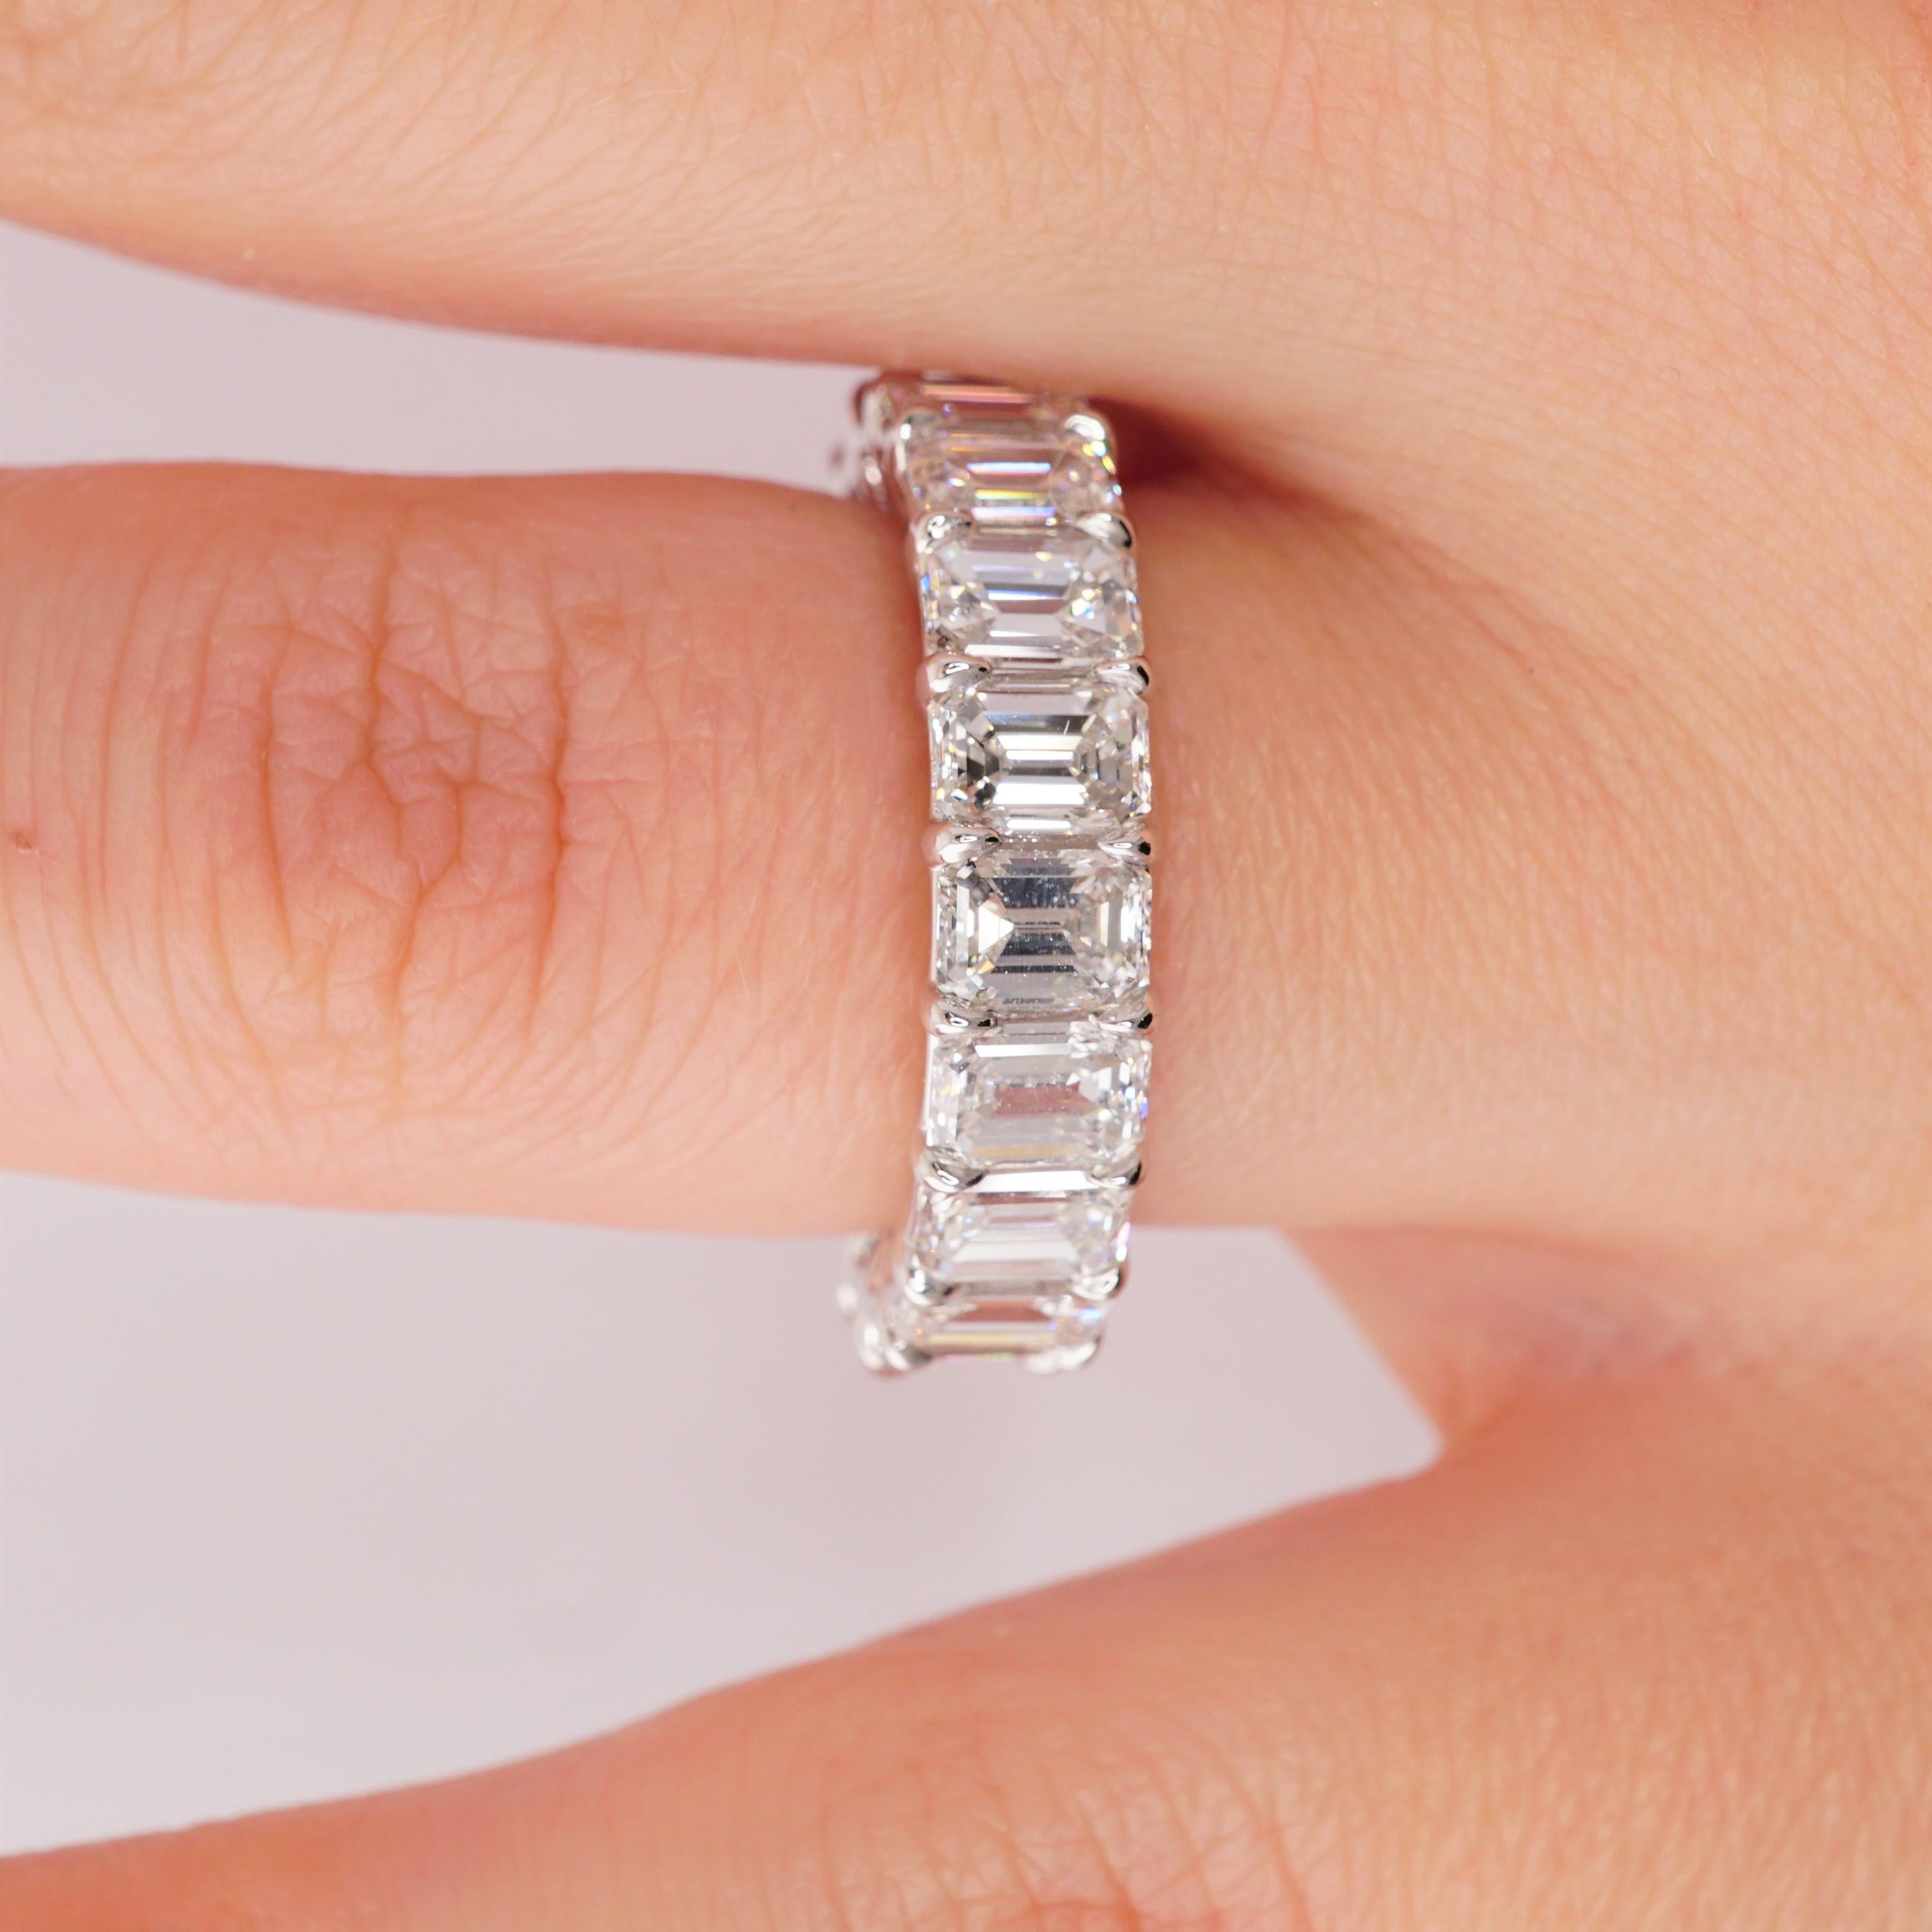 Diamond Eternity Band set in Platinum. 20 Emerald cut diamonds are D-E-F-G VVS2-VS1. Carat weight: 6.22 ct. All stones are GIA-Certified. Total ring weight 6.50 grams. Ring size 5.75. Width of the band is 5.6mm. Can be sized upon request. This ring